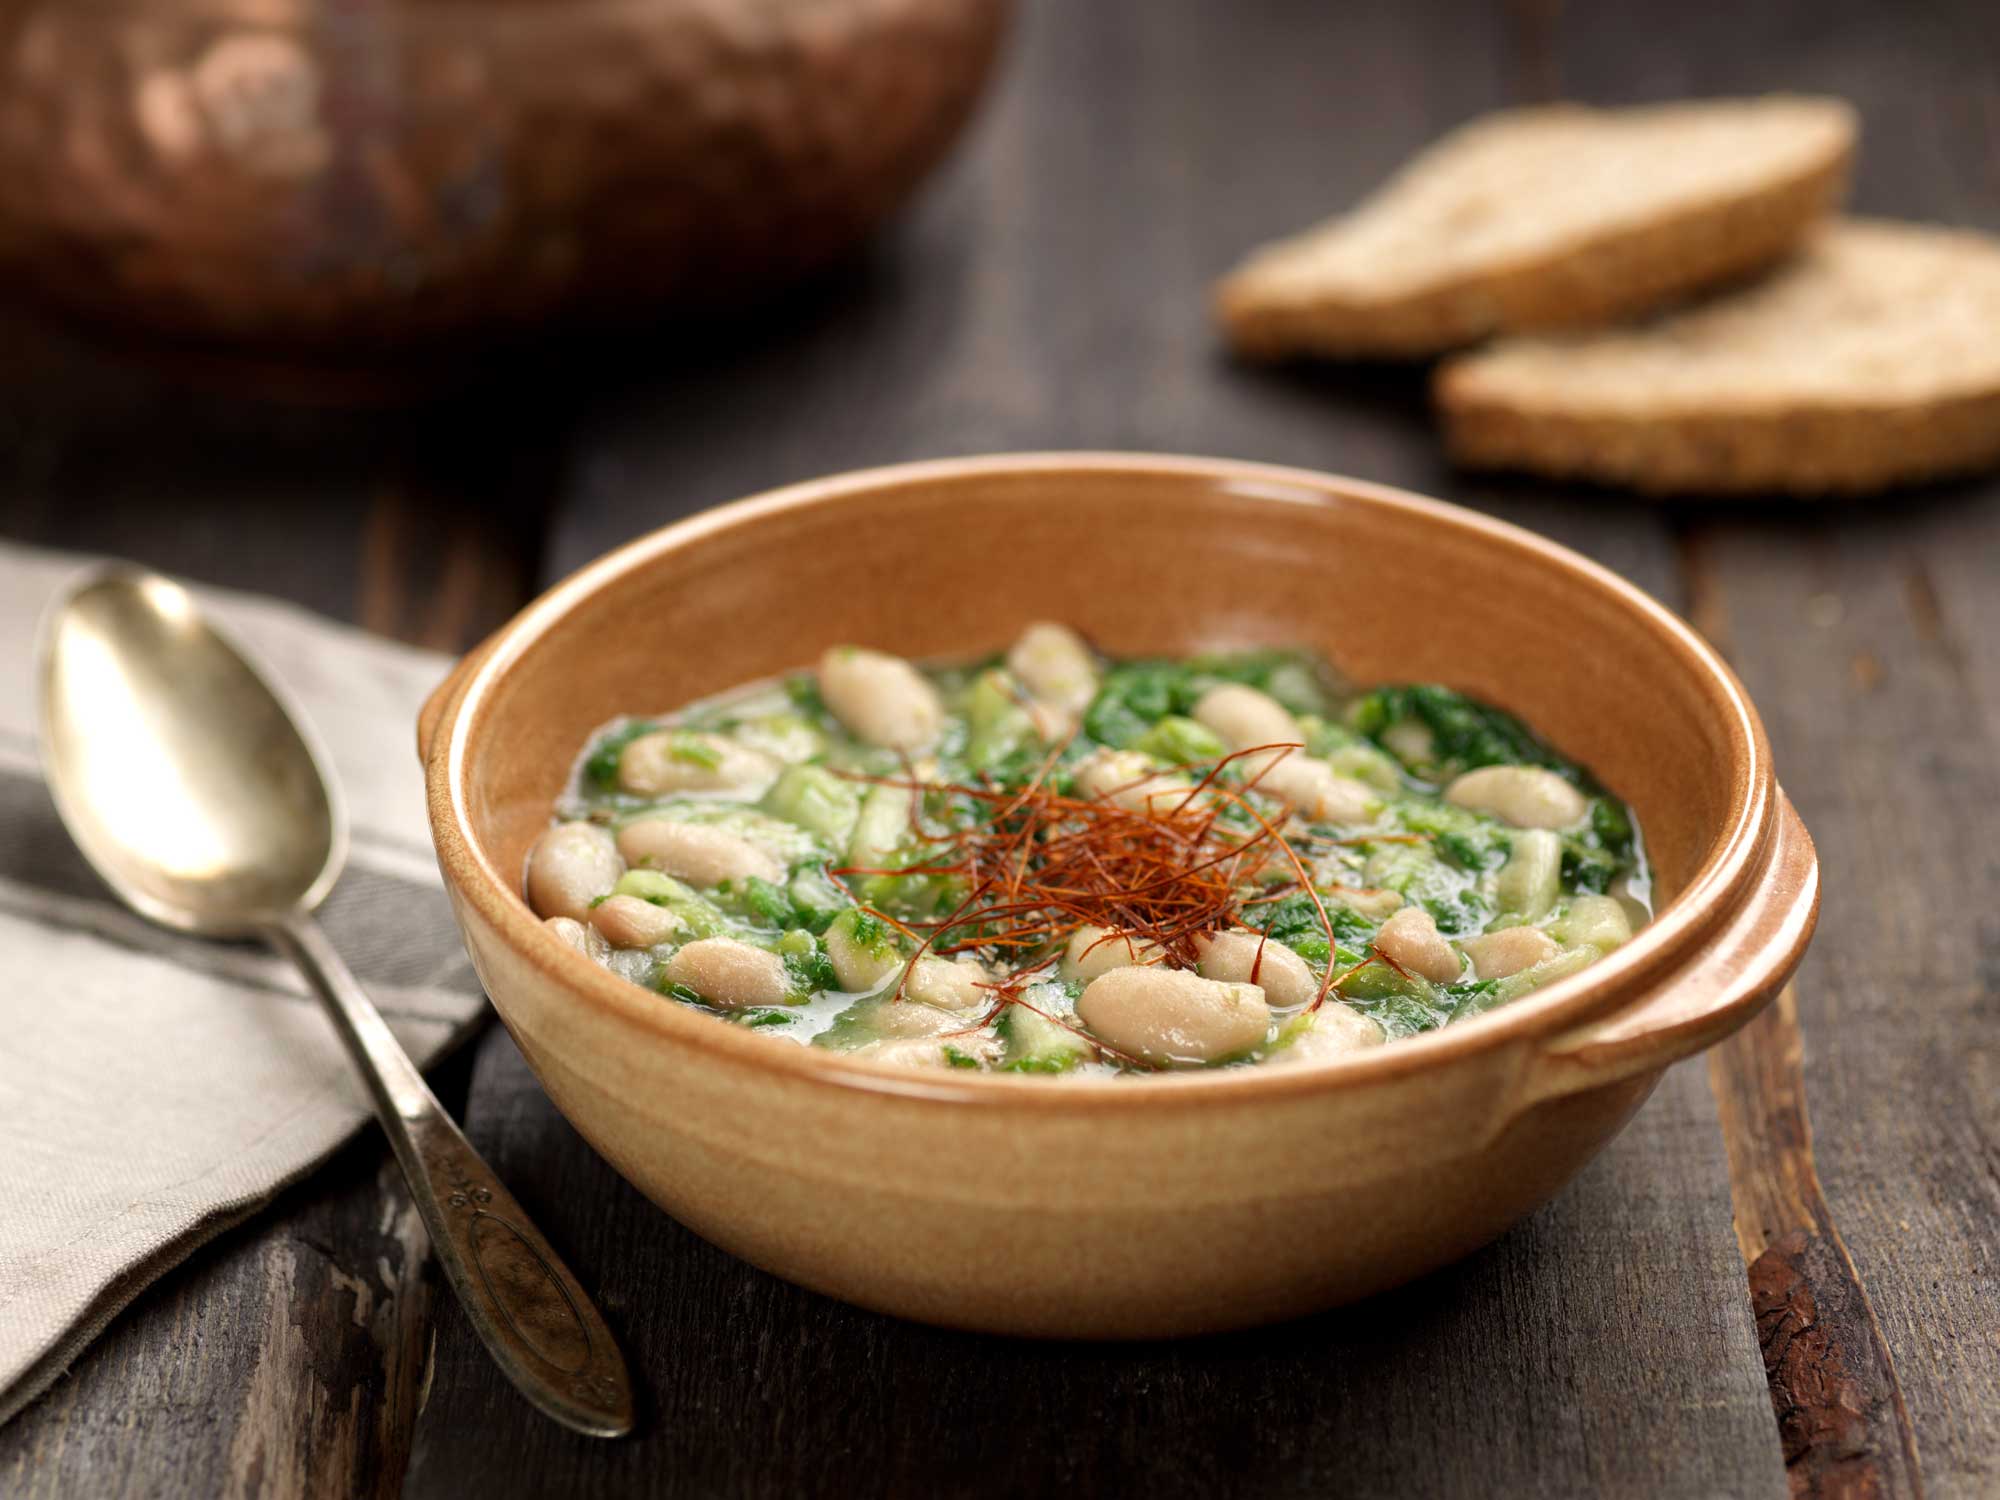 Spicy soup of escarole and cannellini beans